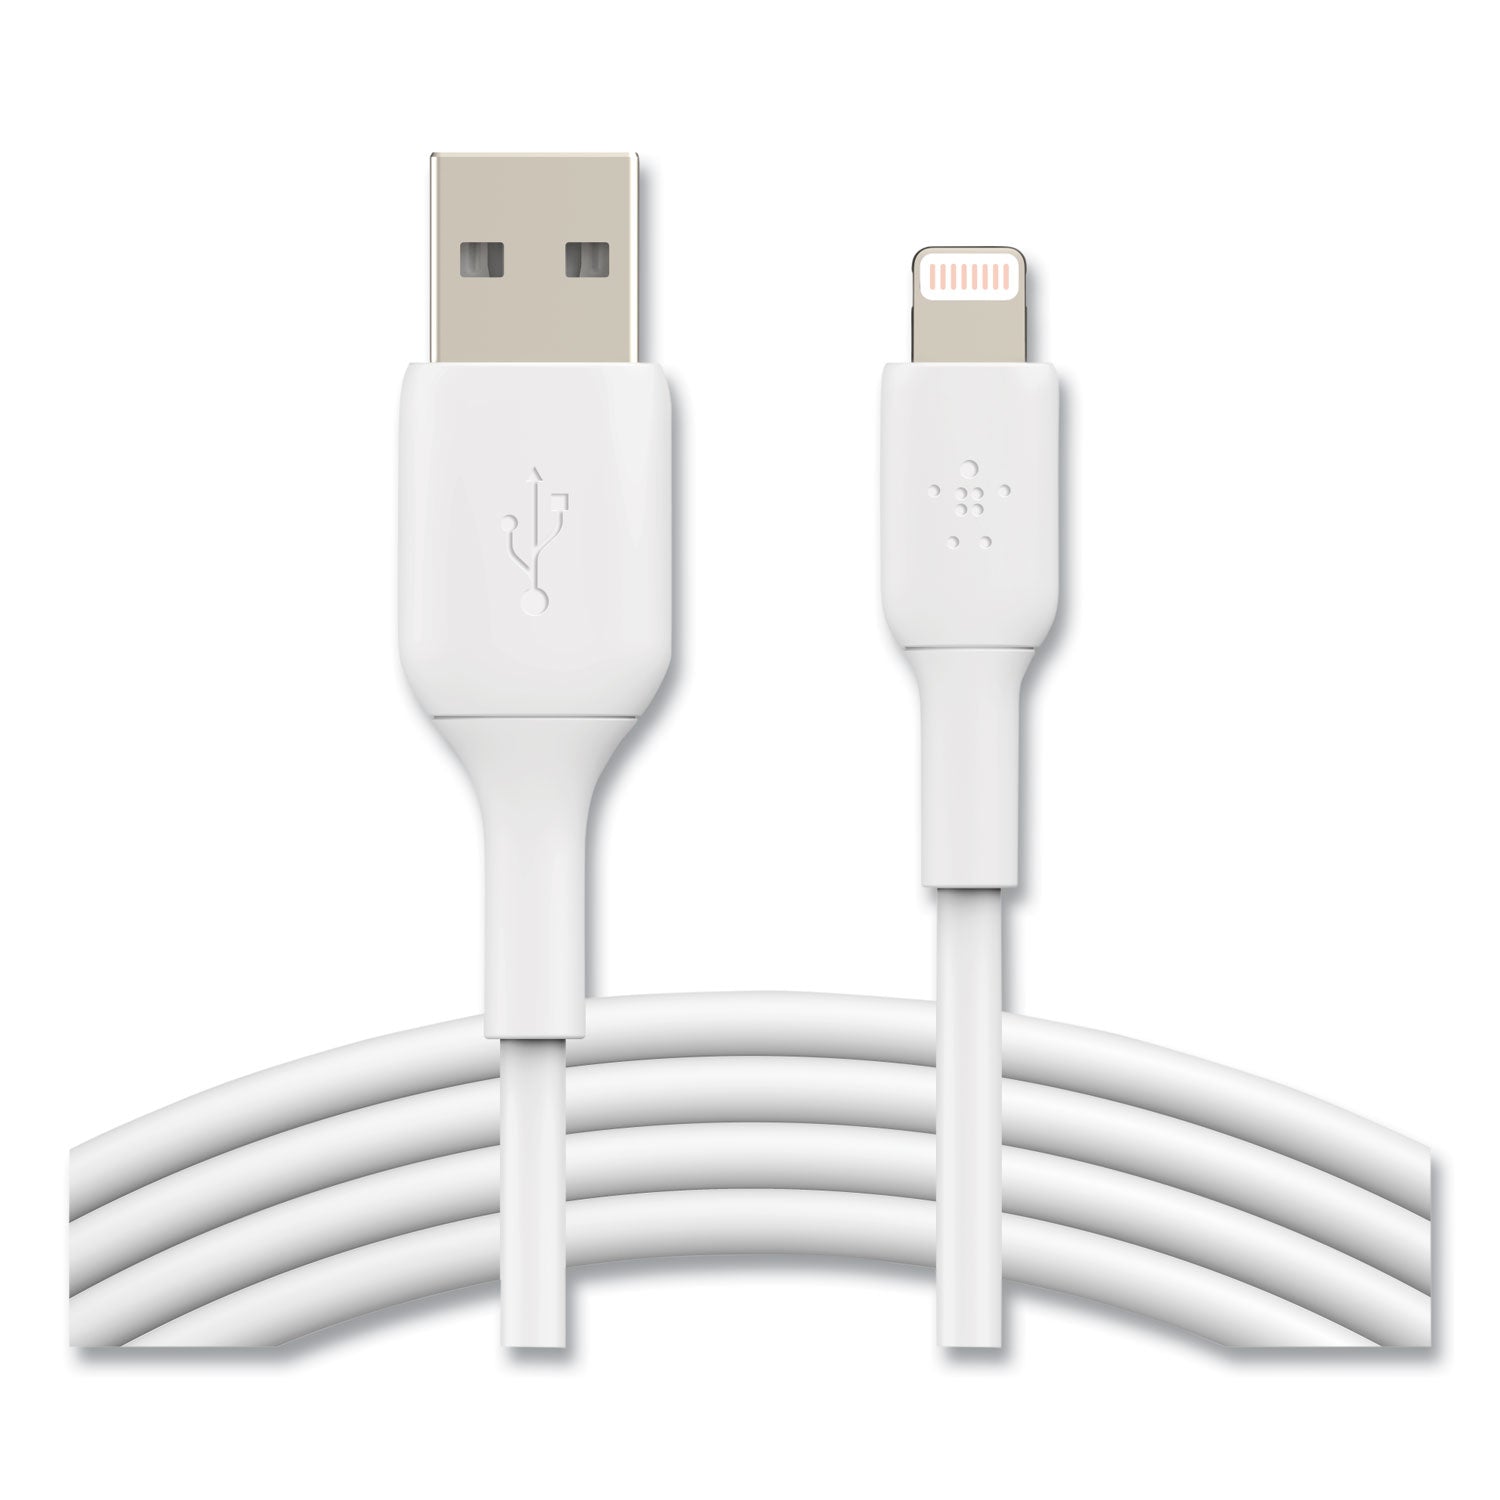 boost-charge-apple-lightning-to-usb-a-chargesync-cable-98-ft-white_blkcaa001bt3mwh - 1